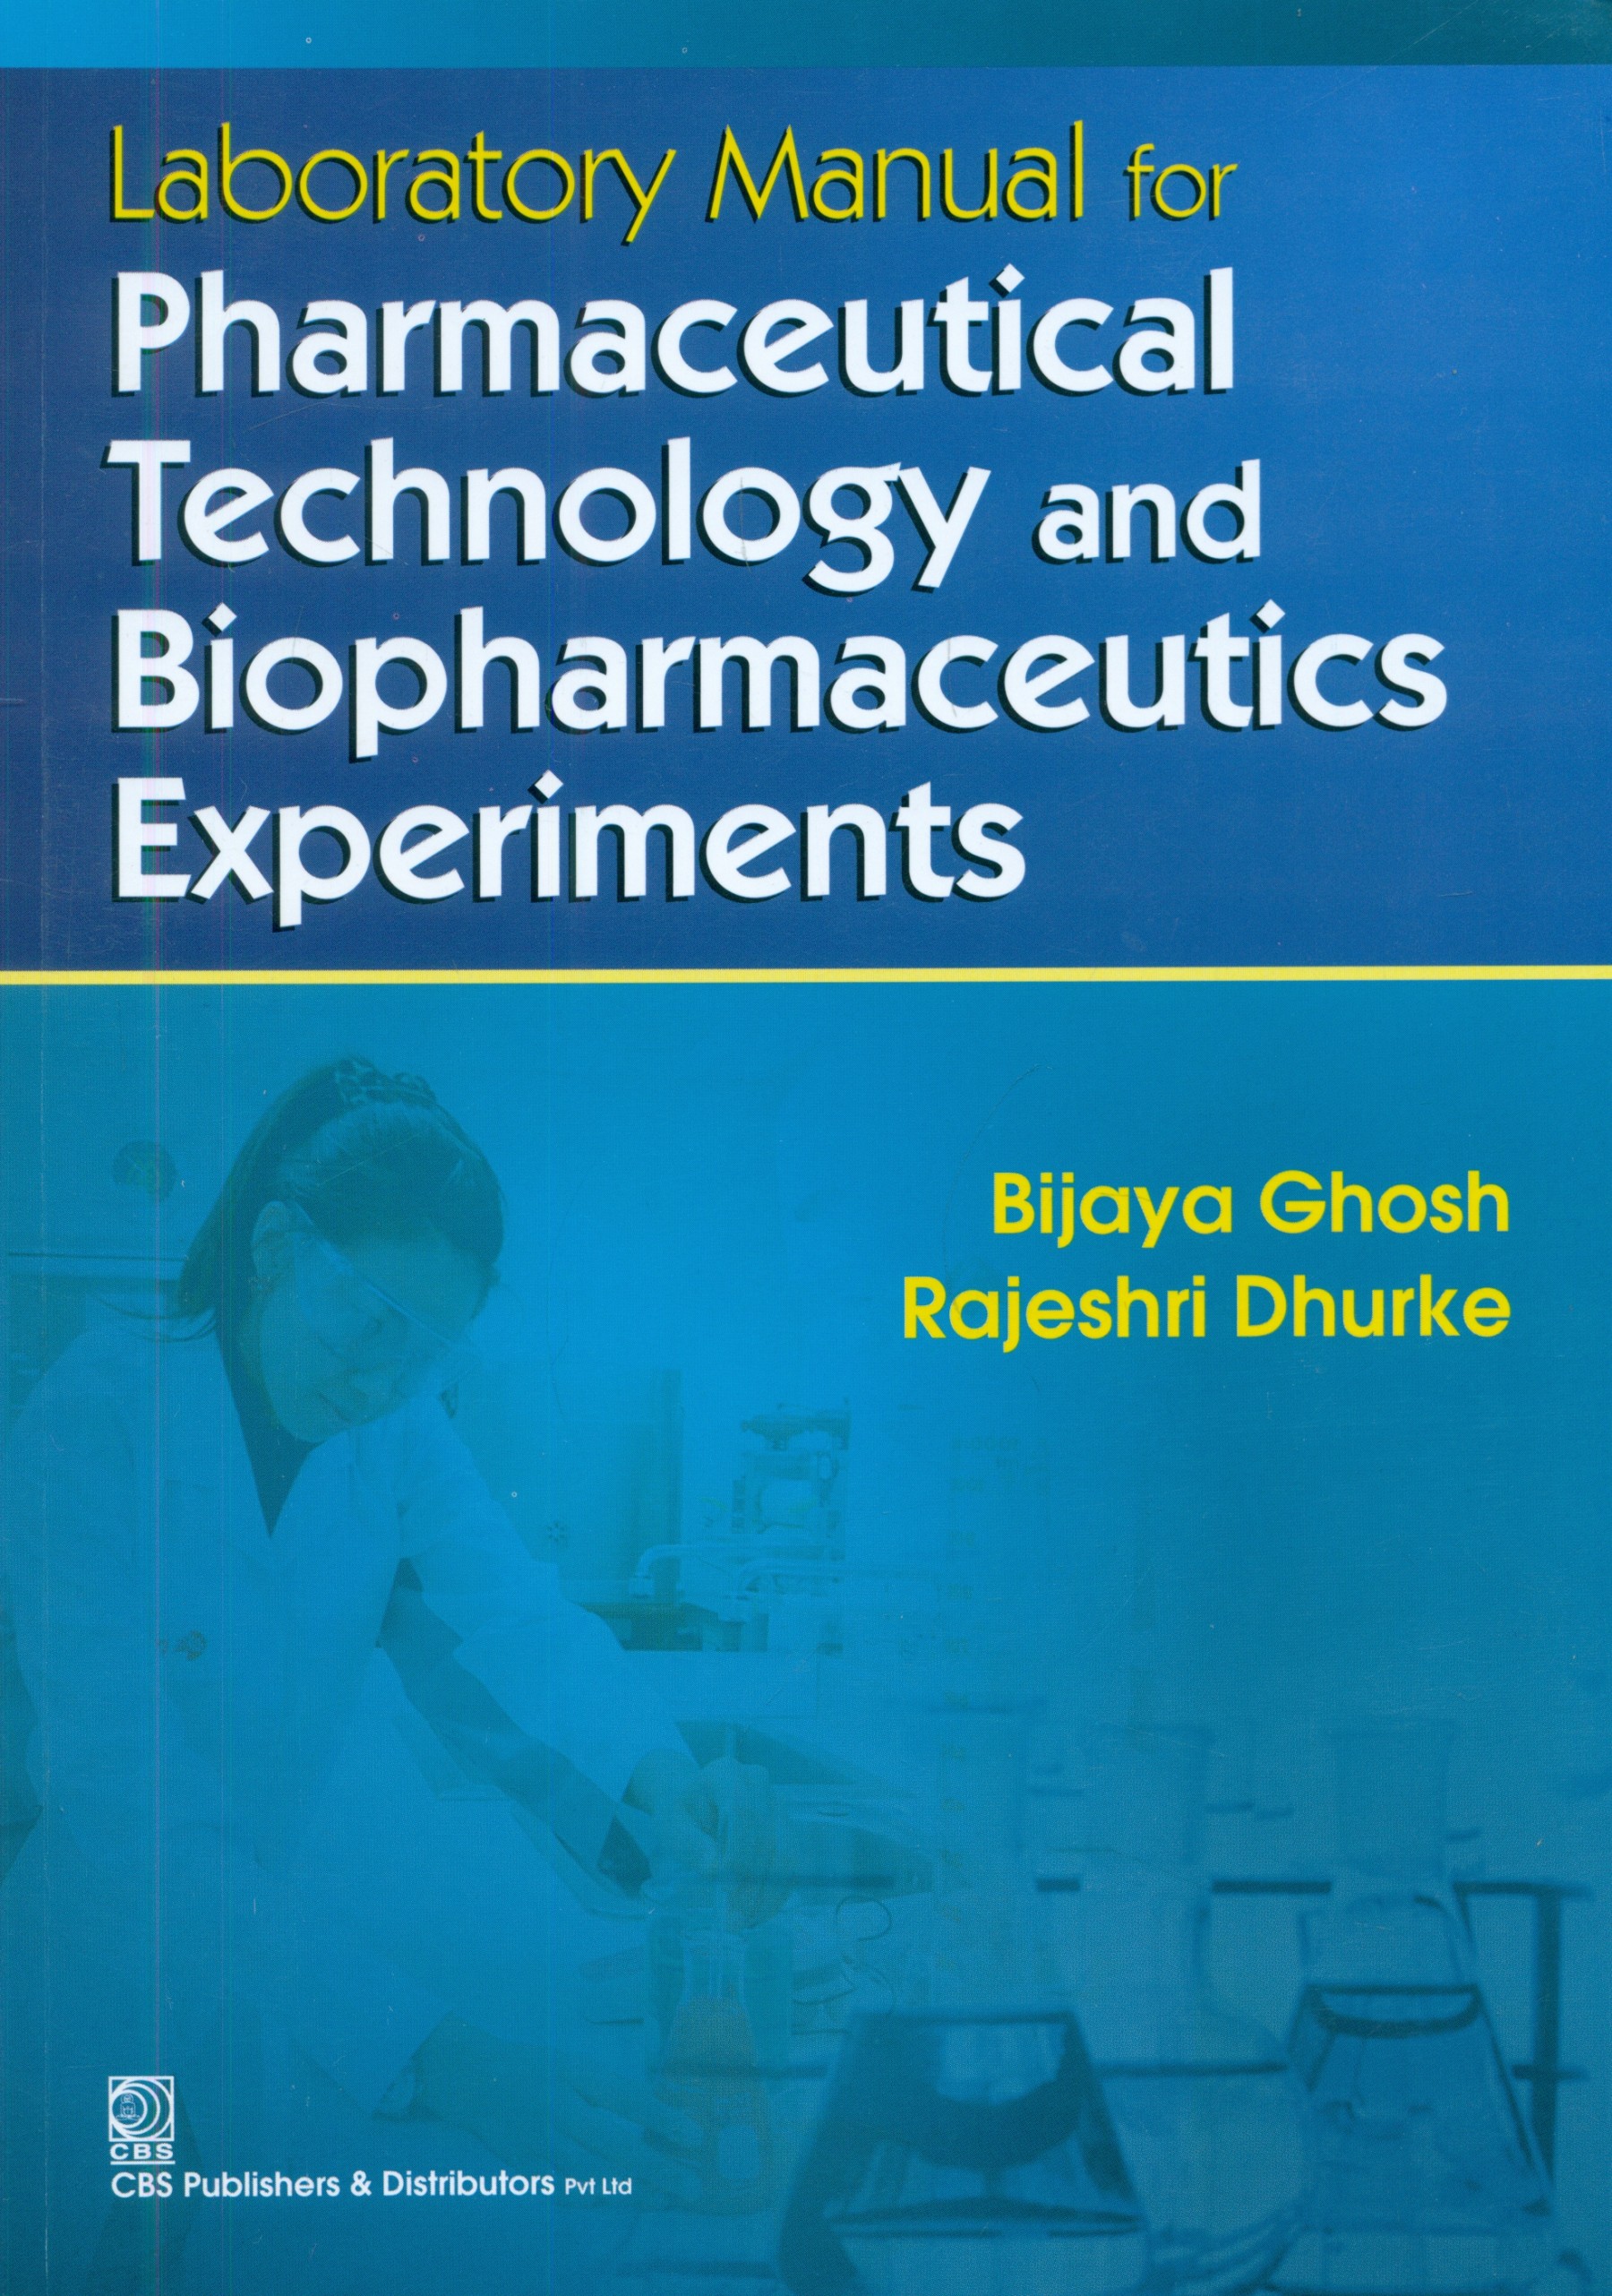 Laboratory Manual For Pharmaceutical Technology And Biopharmaceutics Experiments (Pb-2016)